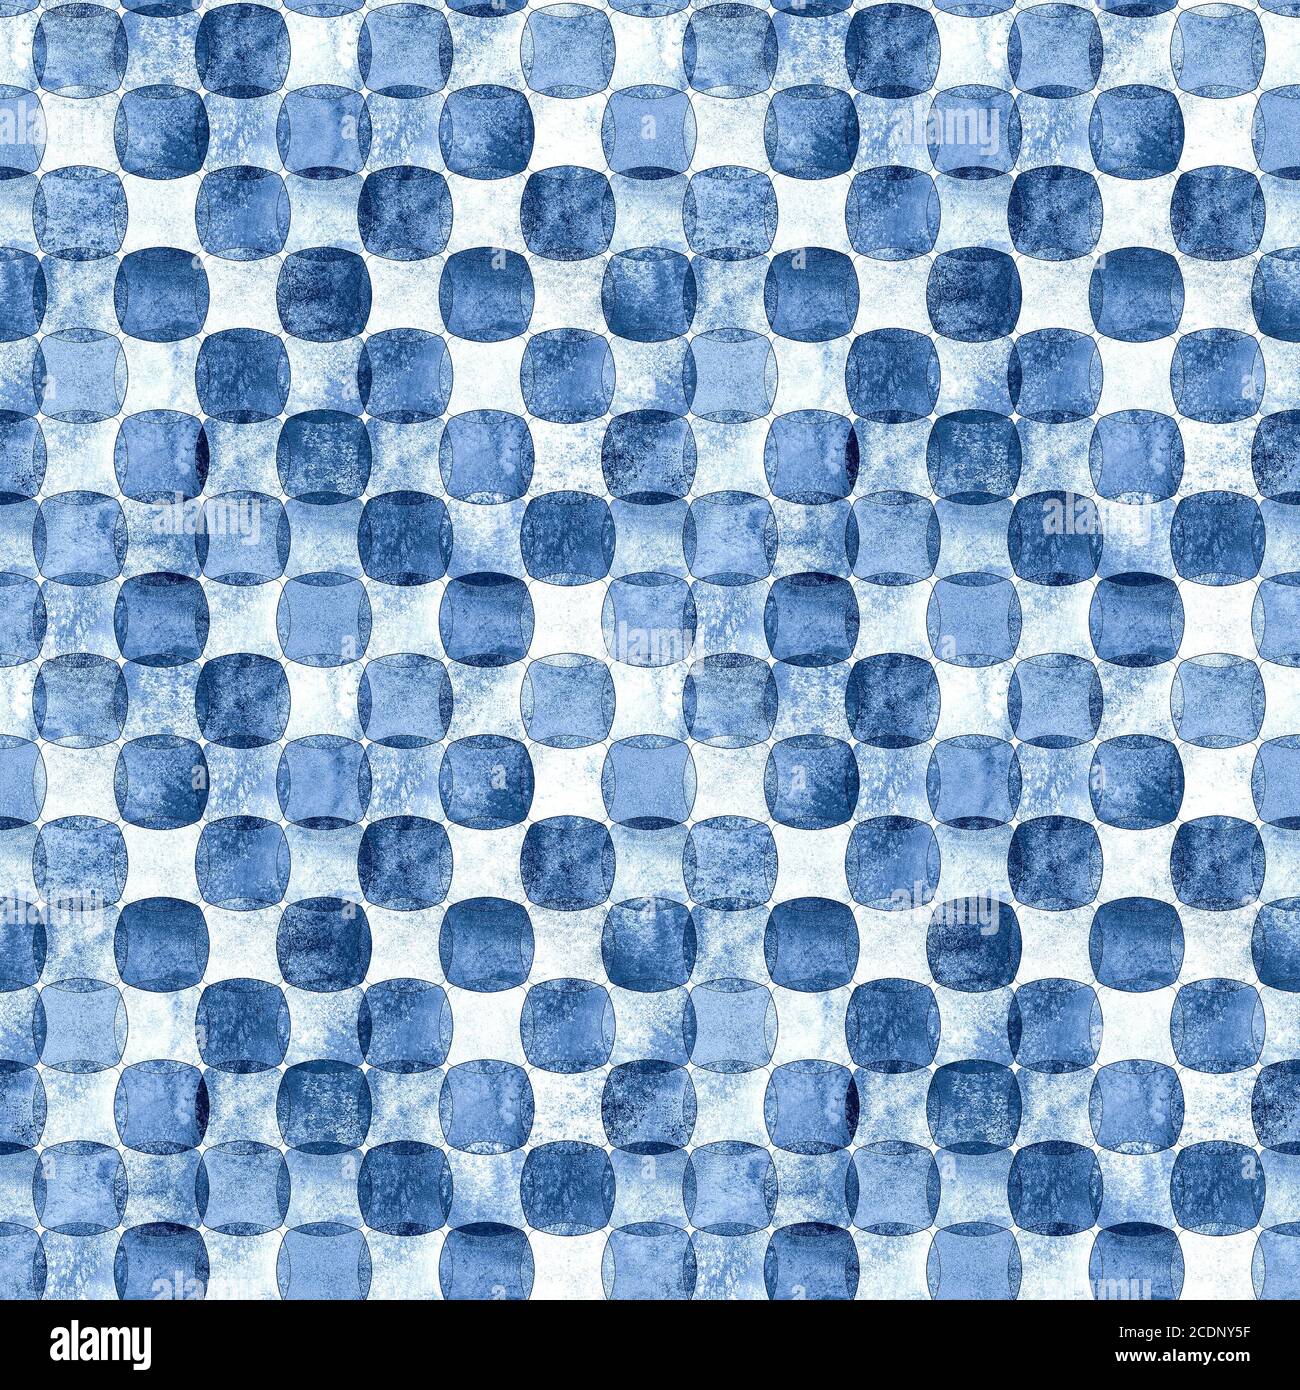 Indigo blue navy seamless geometric pattern with grunge polka dot monochrome watercolor abstract overlapping shapes checkered background. Watercolour Stock Photo